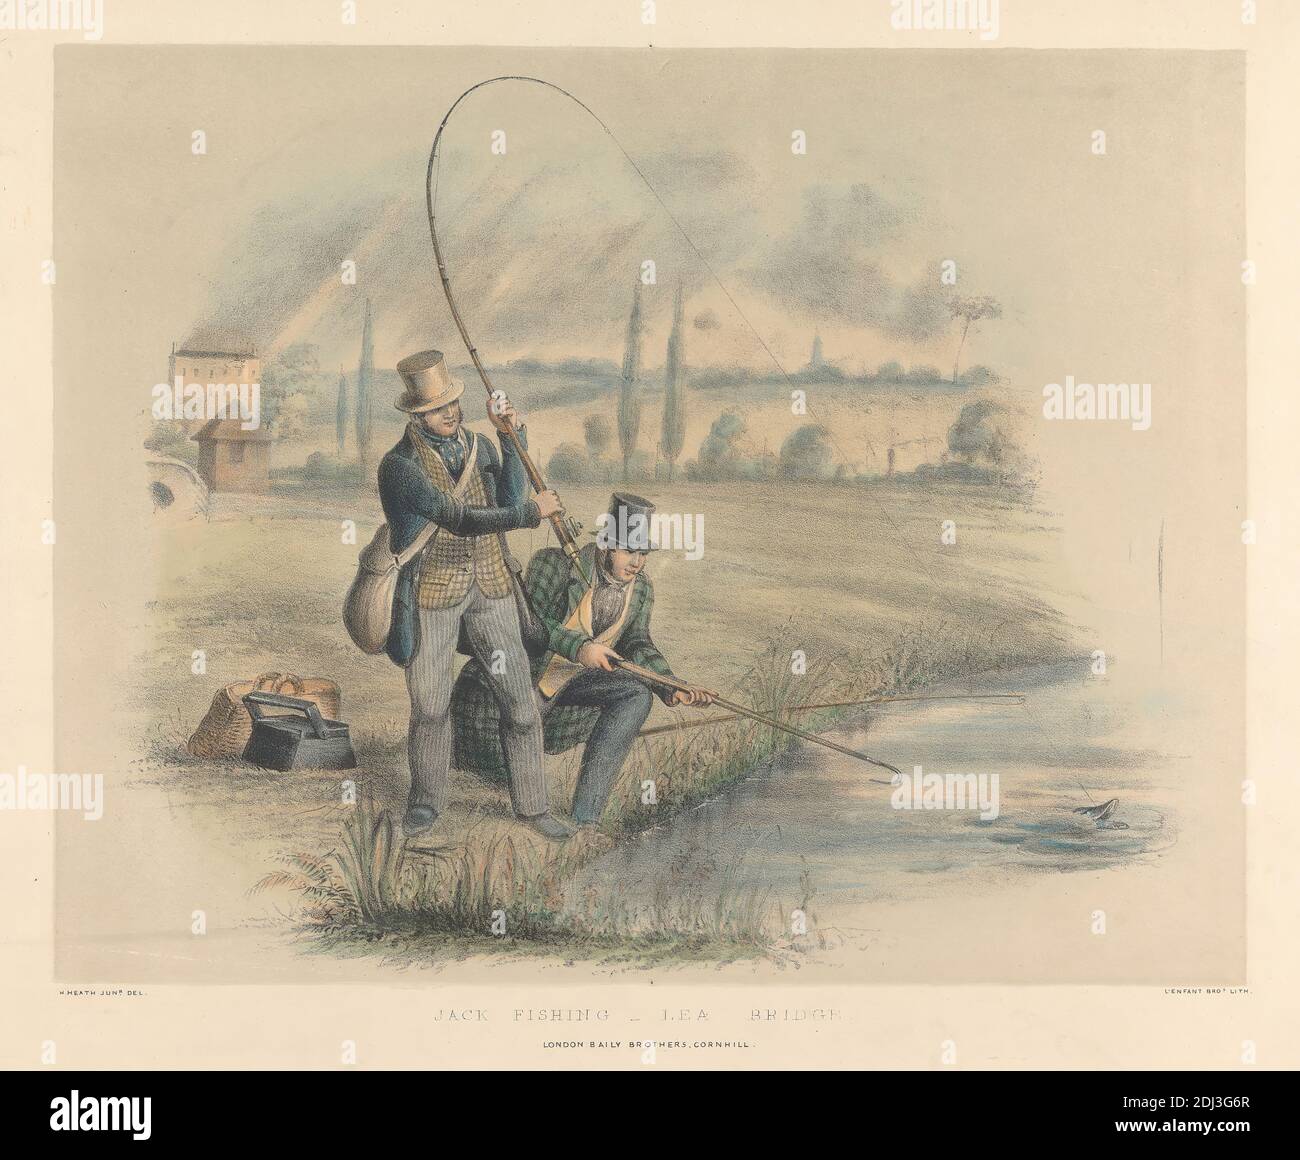 Angling set of six: 1. Jack Fishing-Lea Bridge, Henry Heath, active 1824–1835, British, no date, Hand colored lithograph, Sheet: 8 7/8 x 11 3/8in. (22.5 x 28.9cm Stock Photo